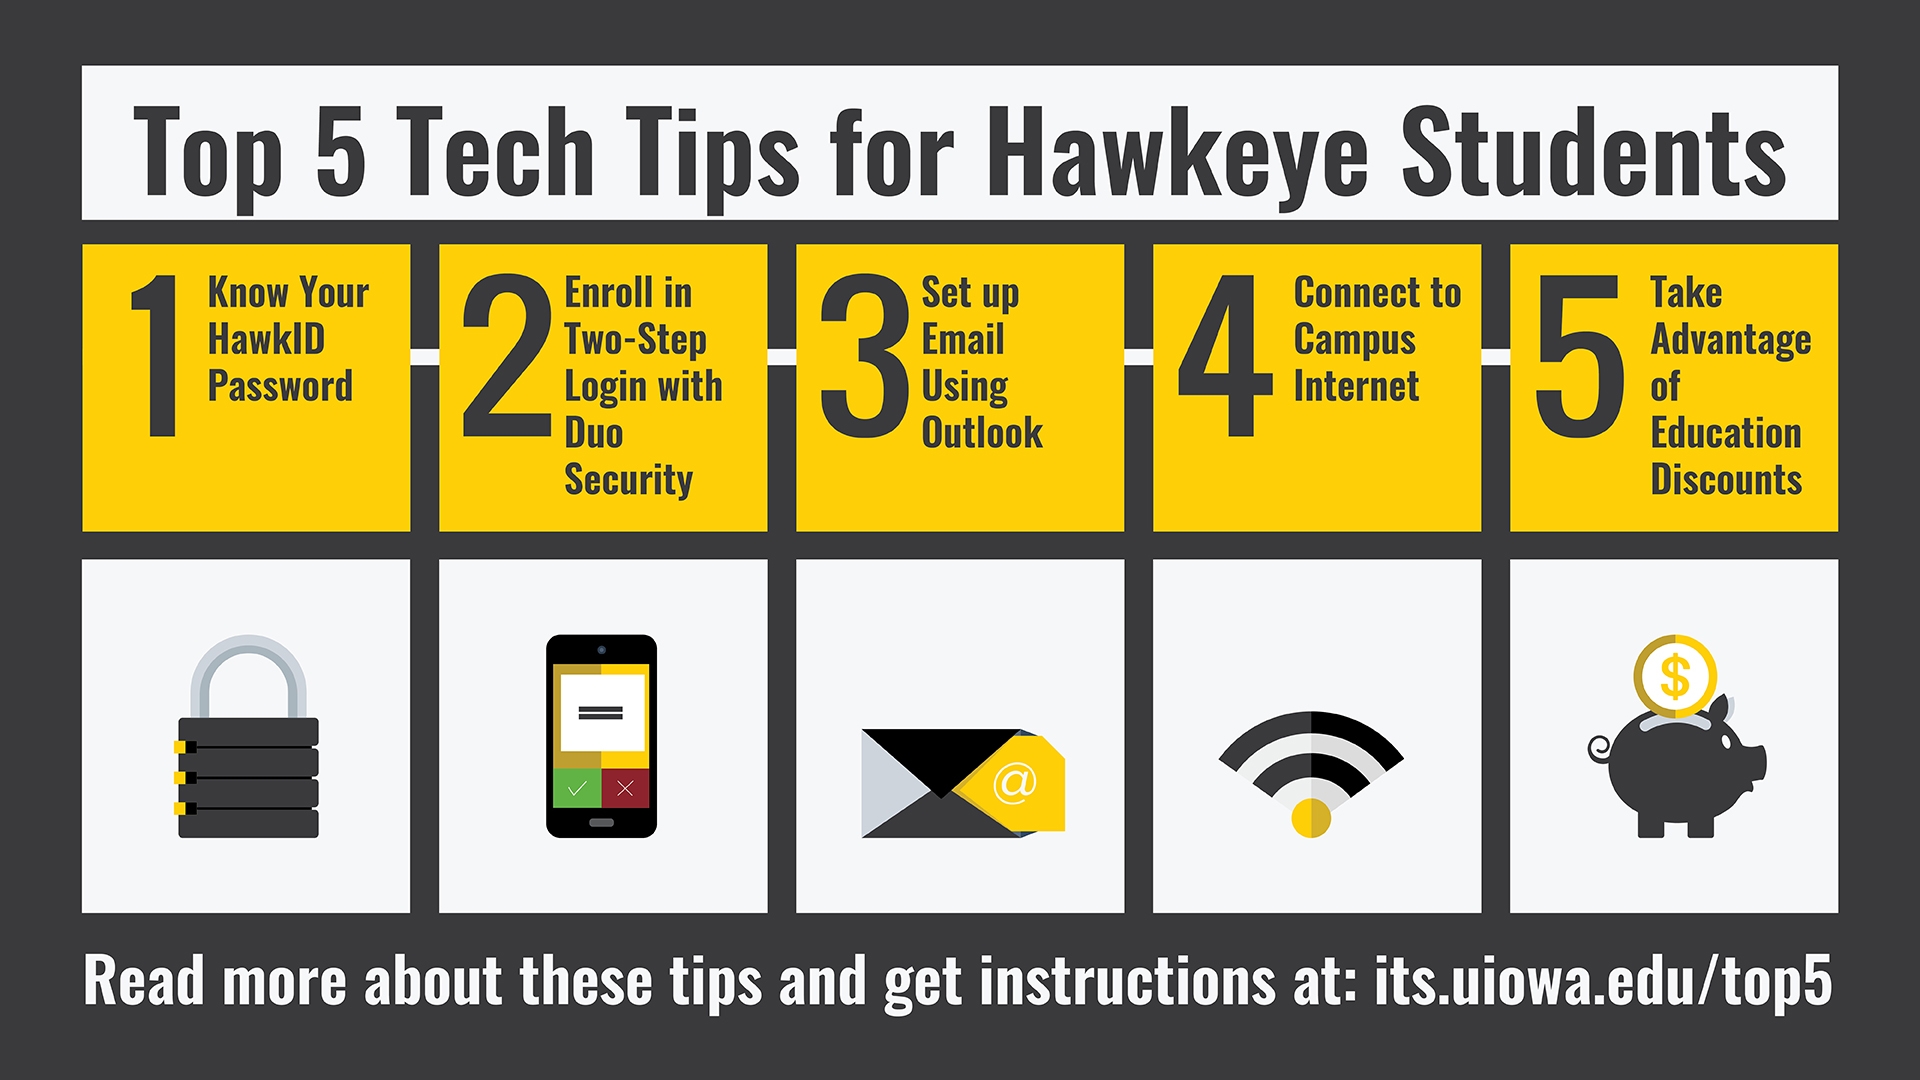 Top 5 Tech Tips for Hawkeye Students